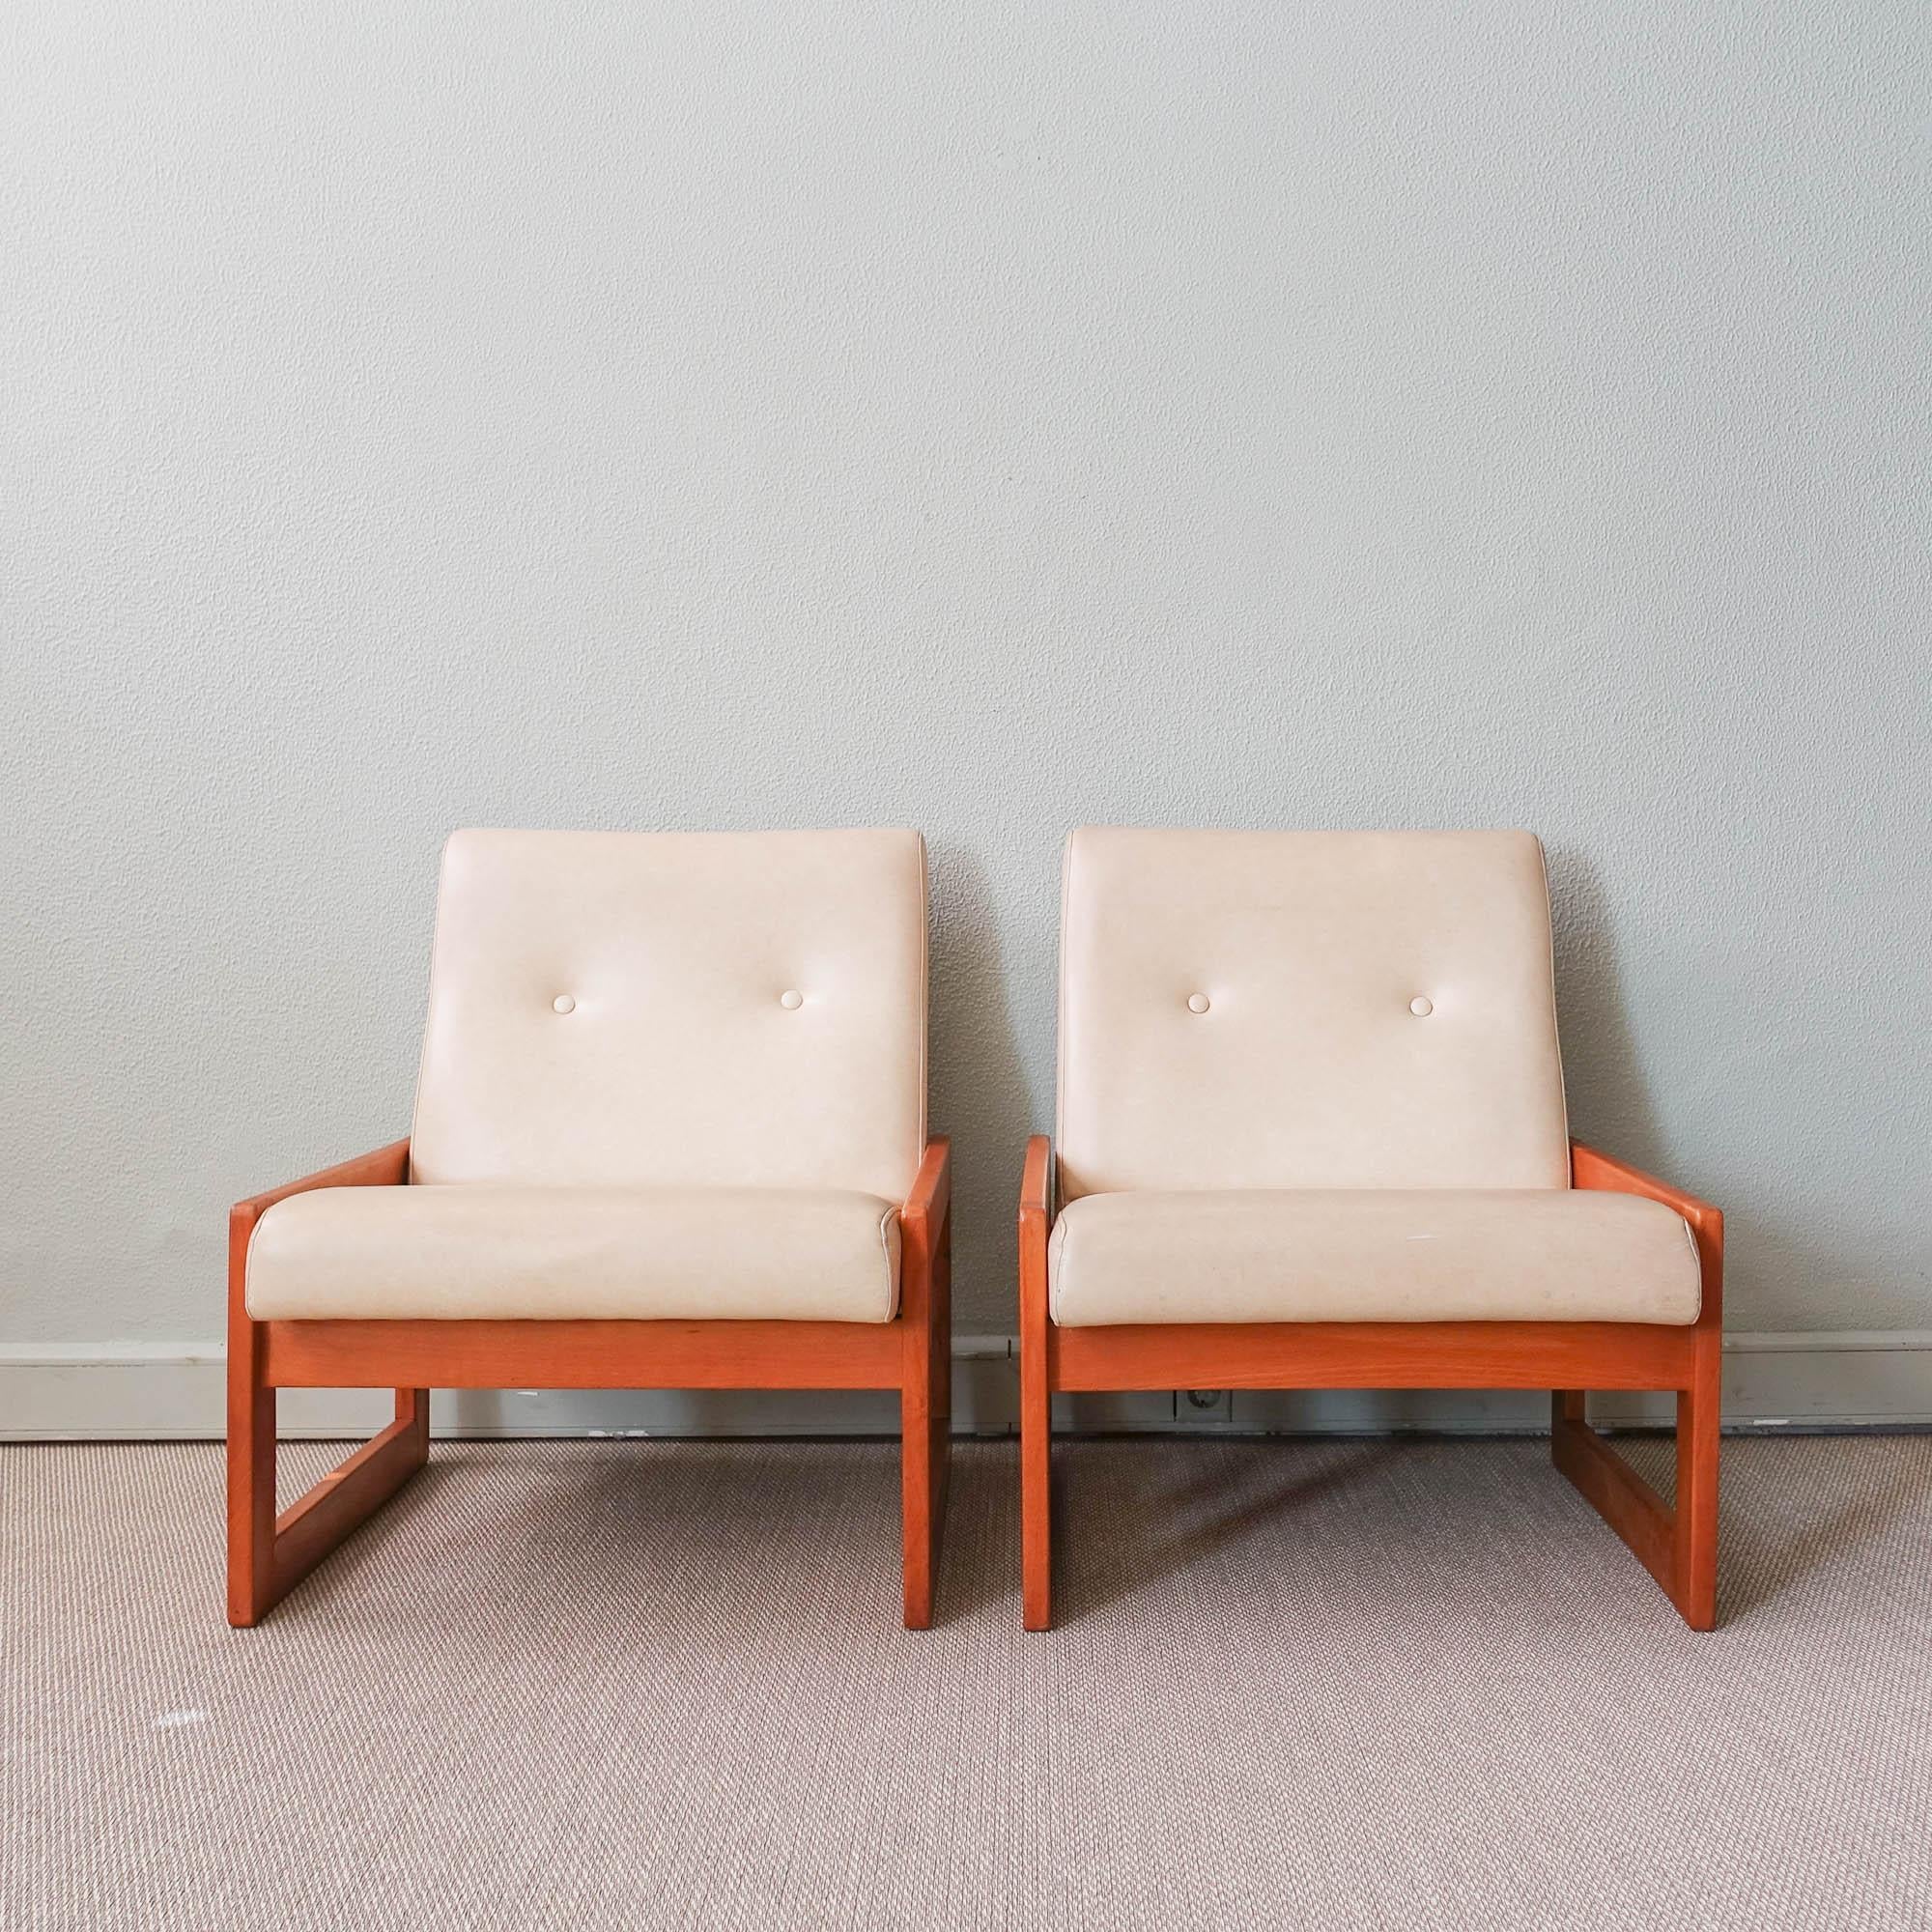 Pair of Easy Chairs, Model Espinho, by José Espinho for Olaio, 1973 For Sale 2